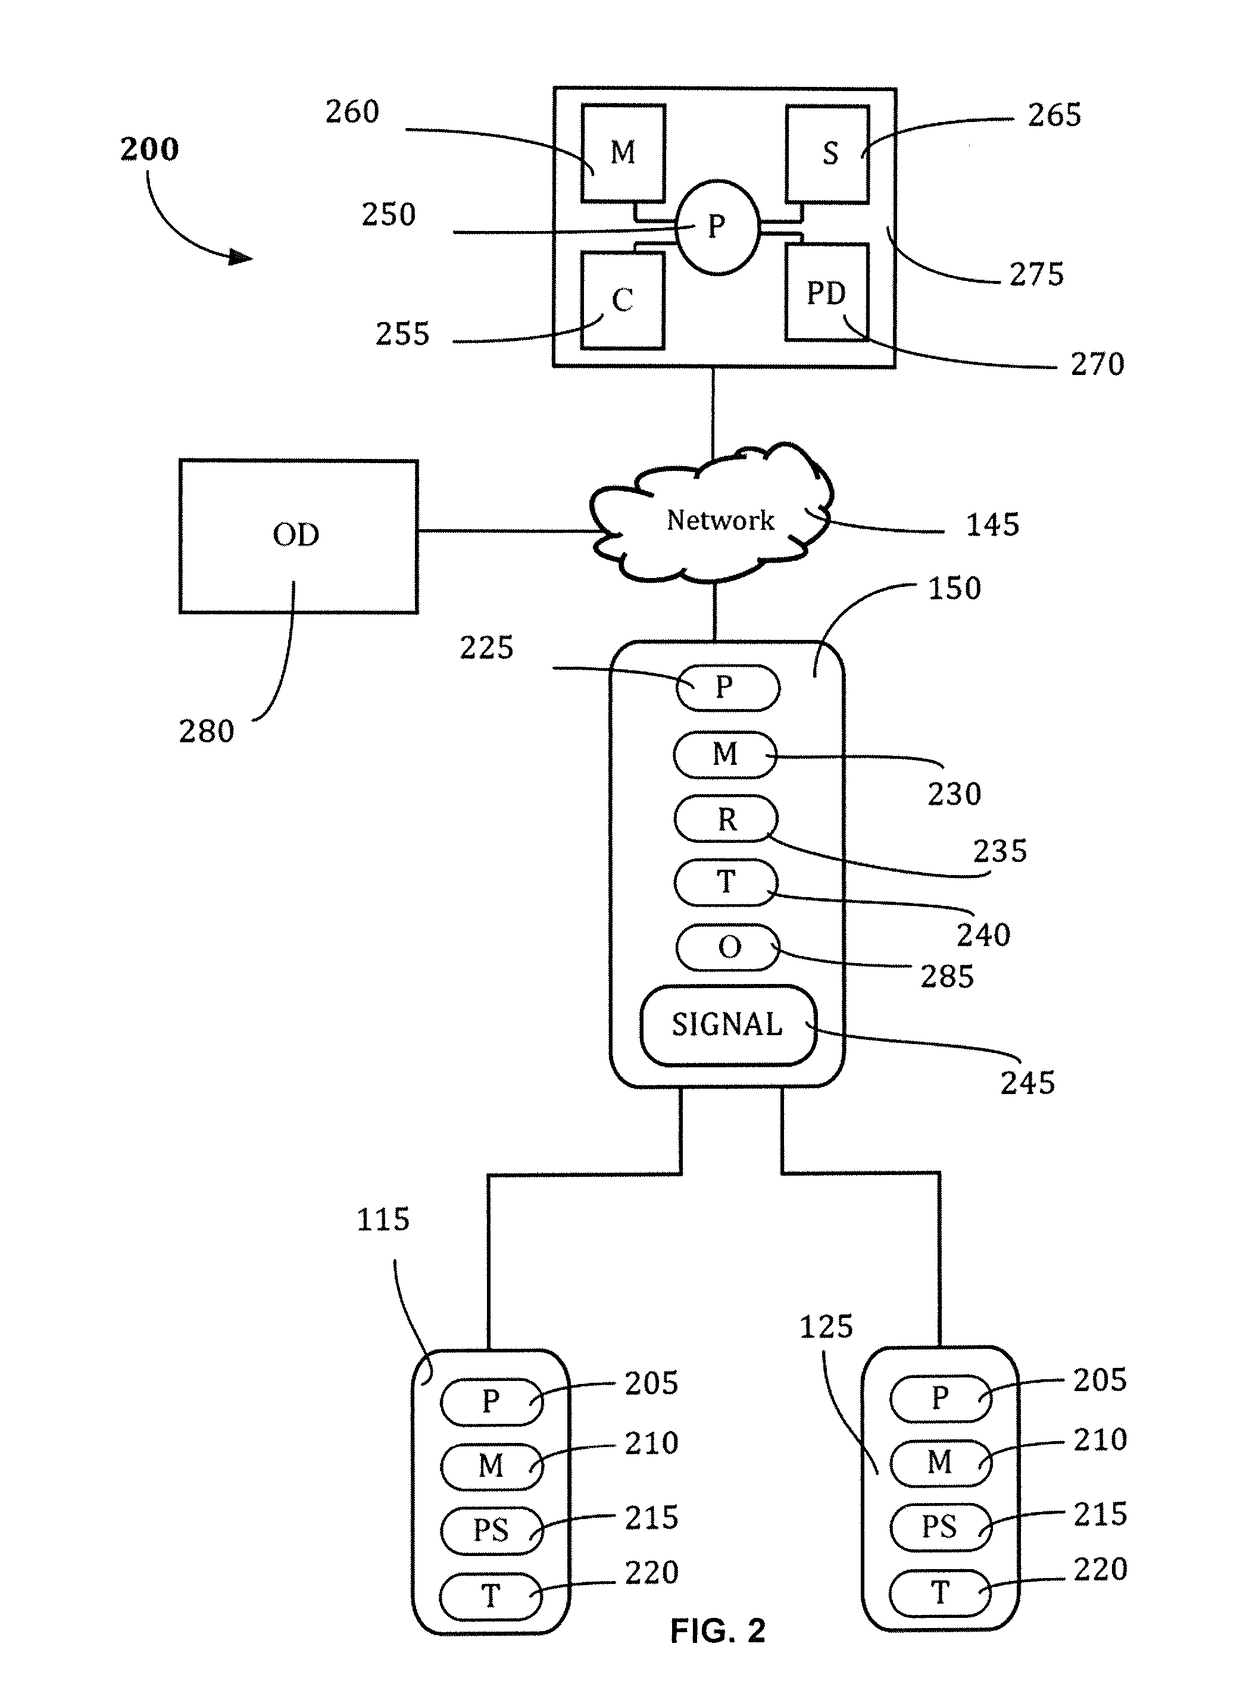 Automated system and process for providing personal safety